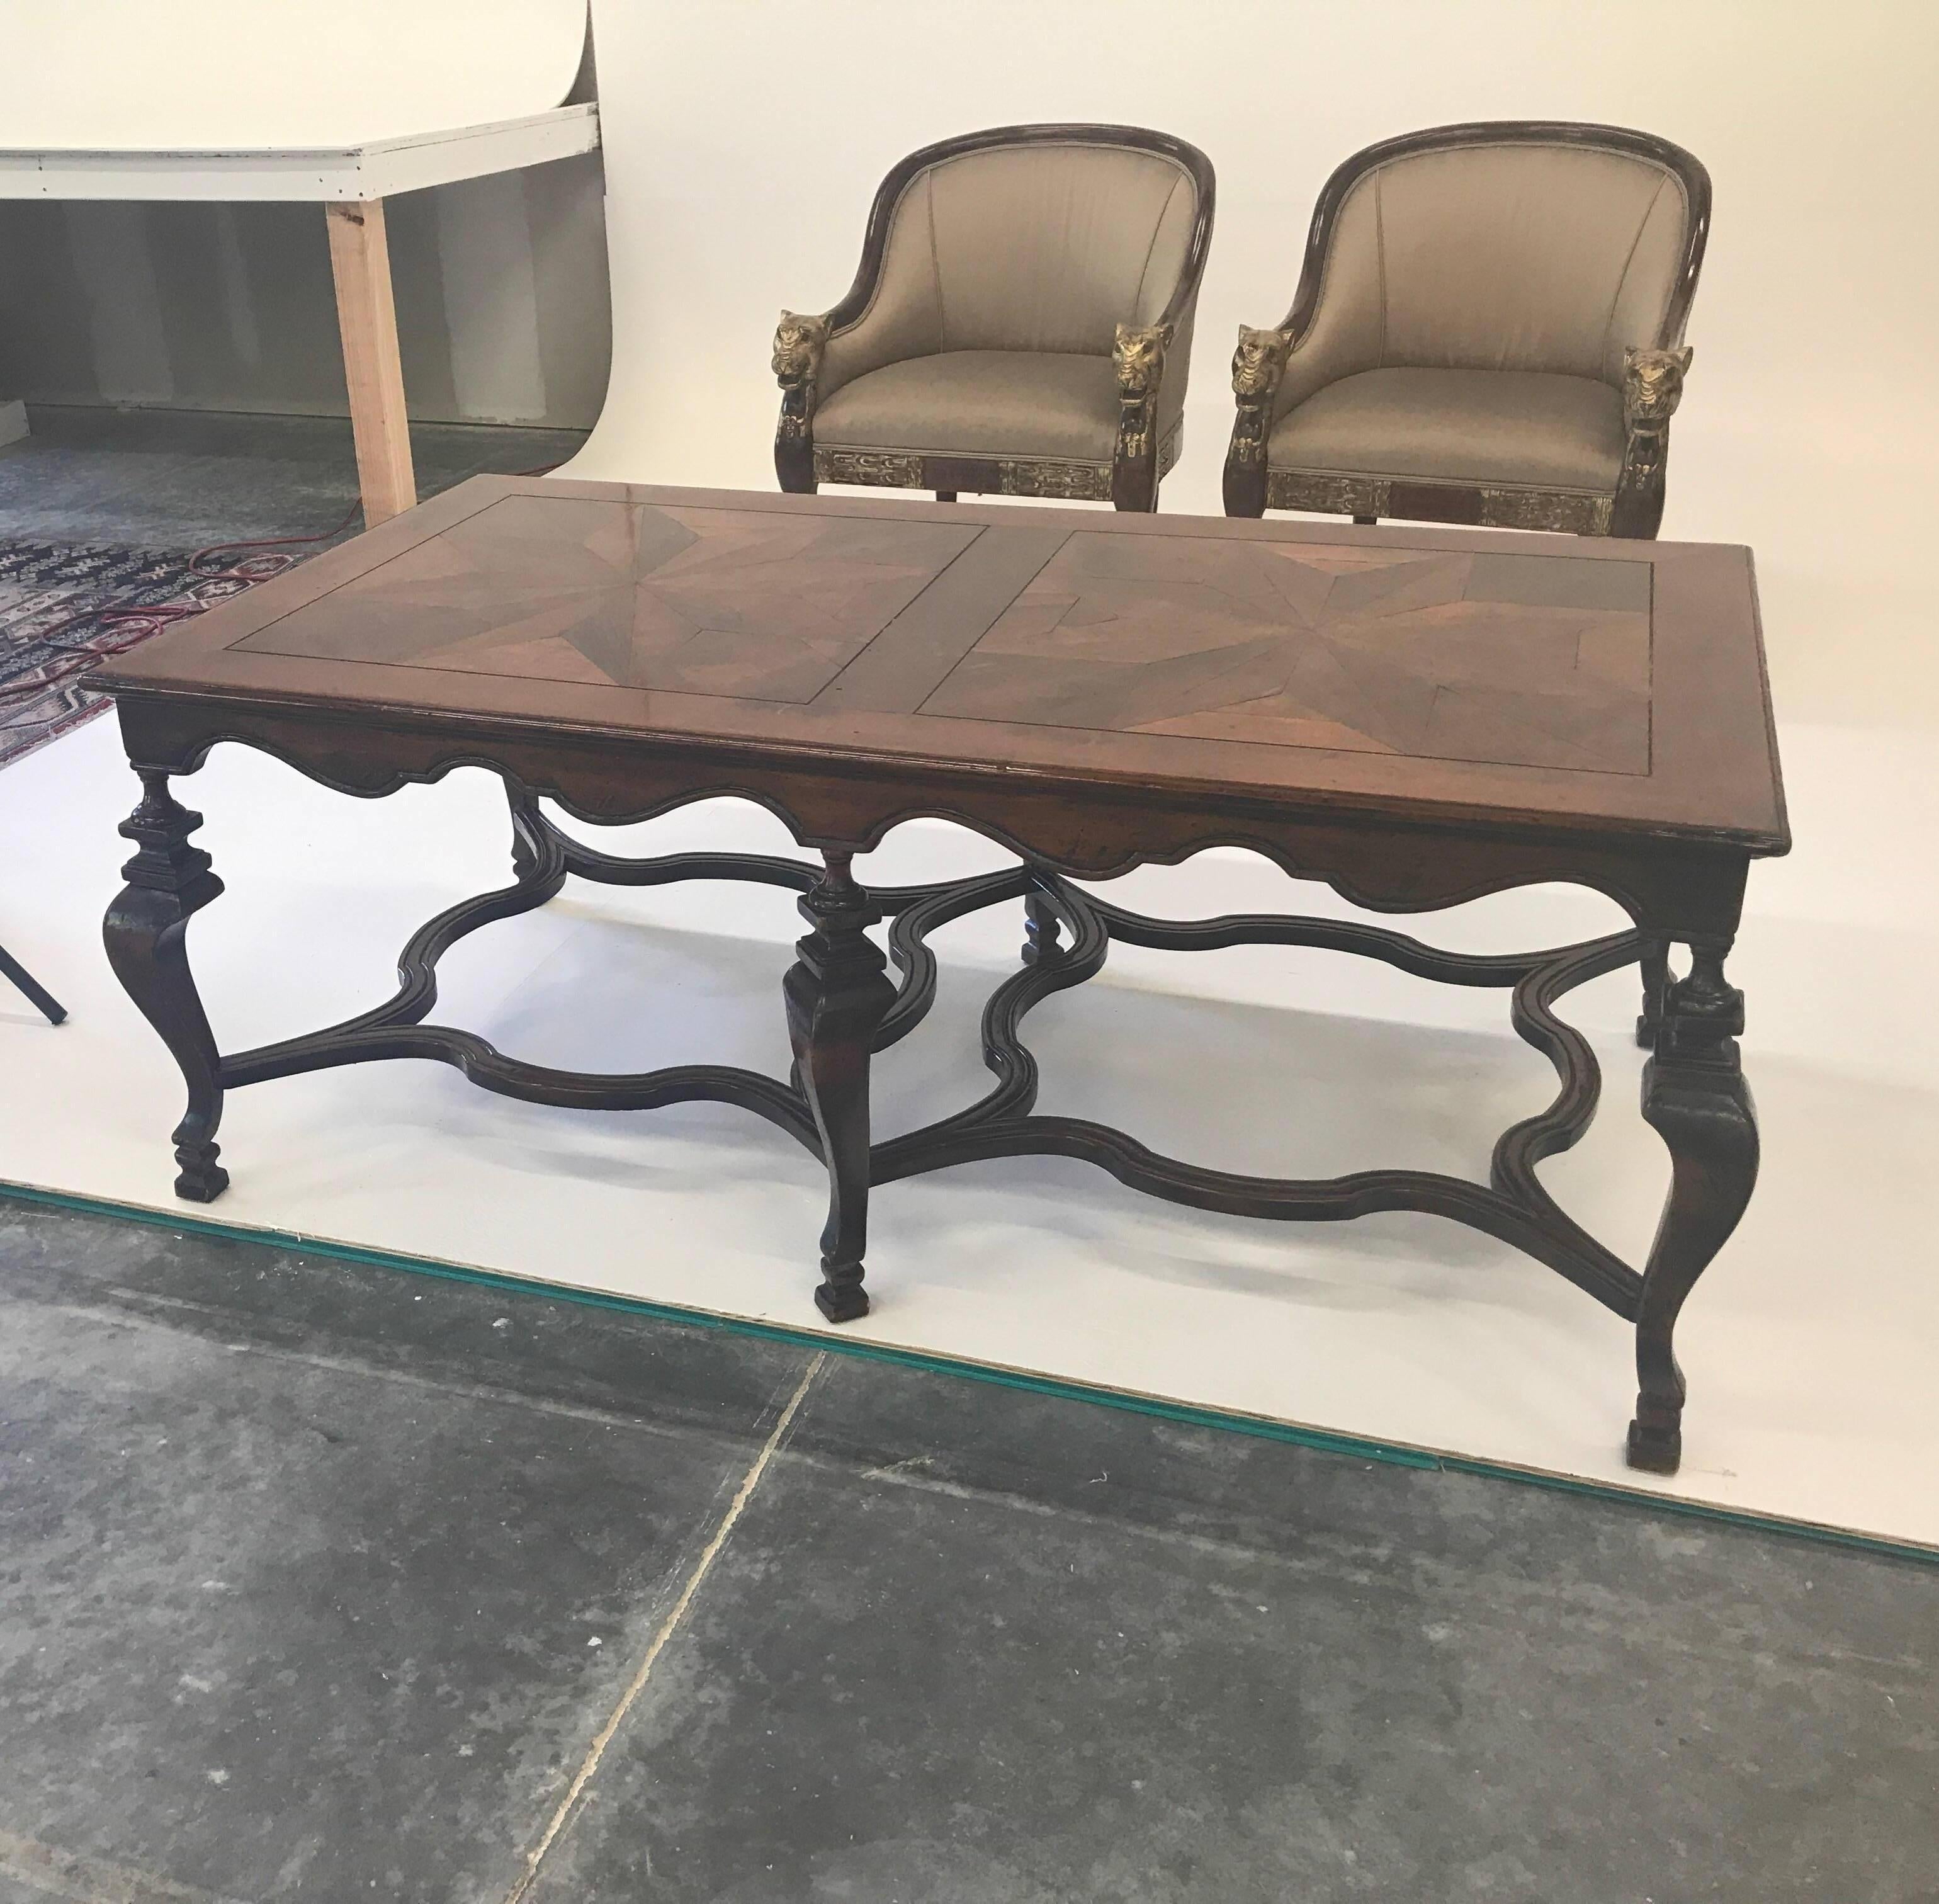 An rare and large fruitwood and walnut continental style cocktail table. This table is a full 62 inches long and taller than average 24 inches tall. The six graceful legs are supported by shapely stretchers for a sturdy surface. The top with a